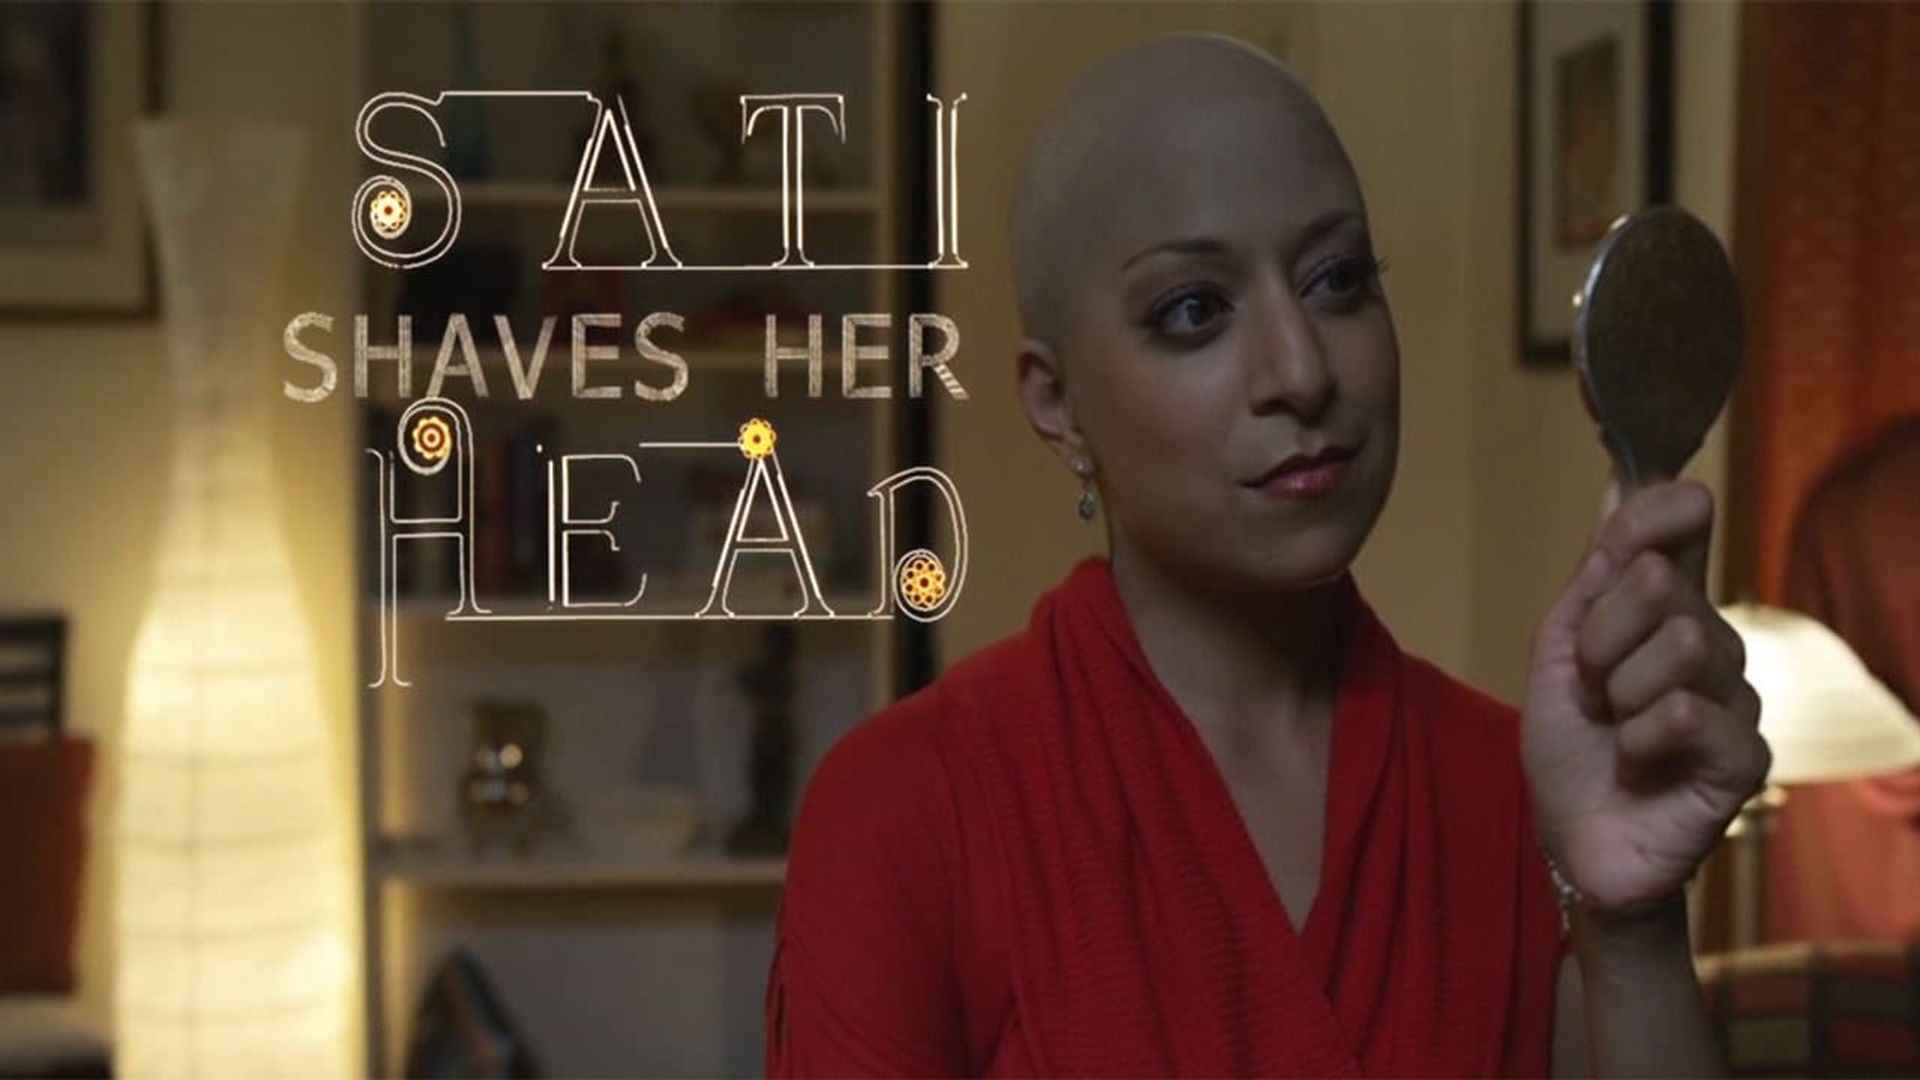 Sati Shaves Her Head background